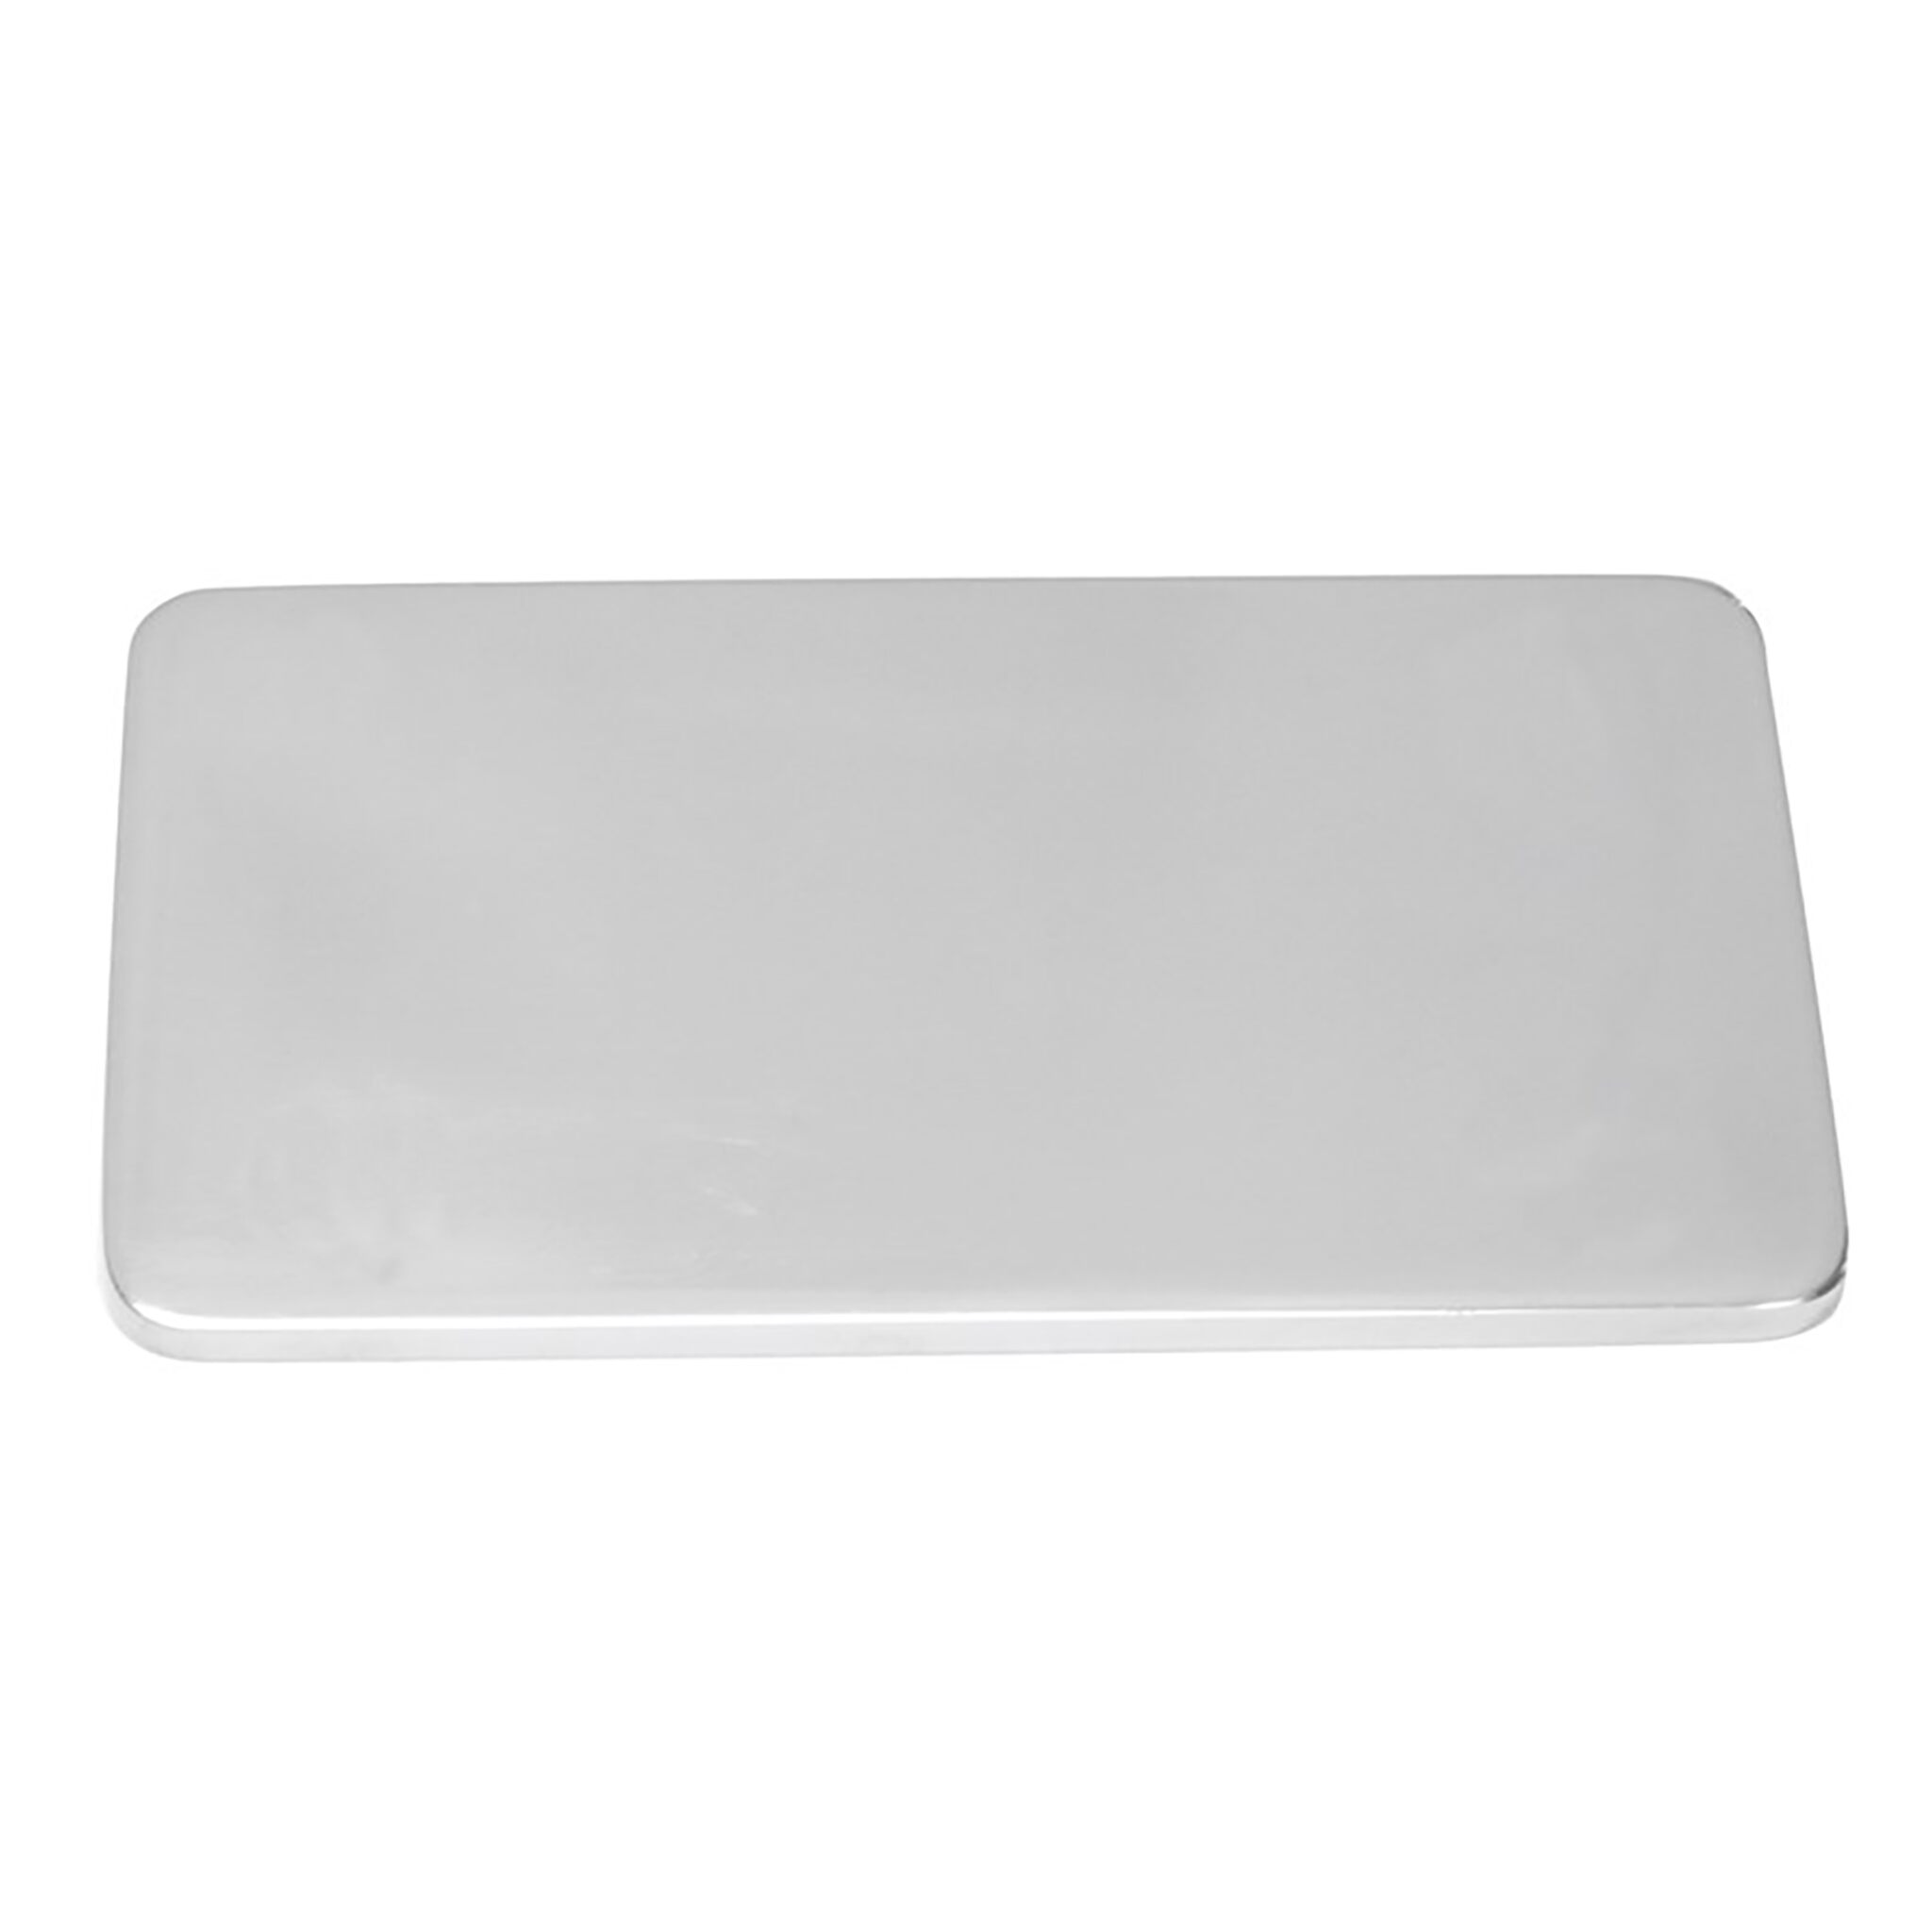 Stainless steel counter plates